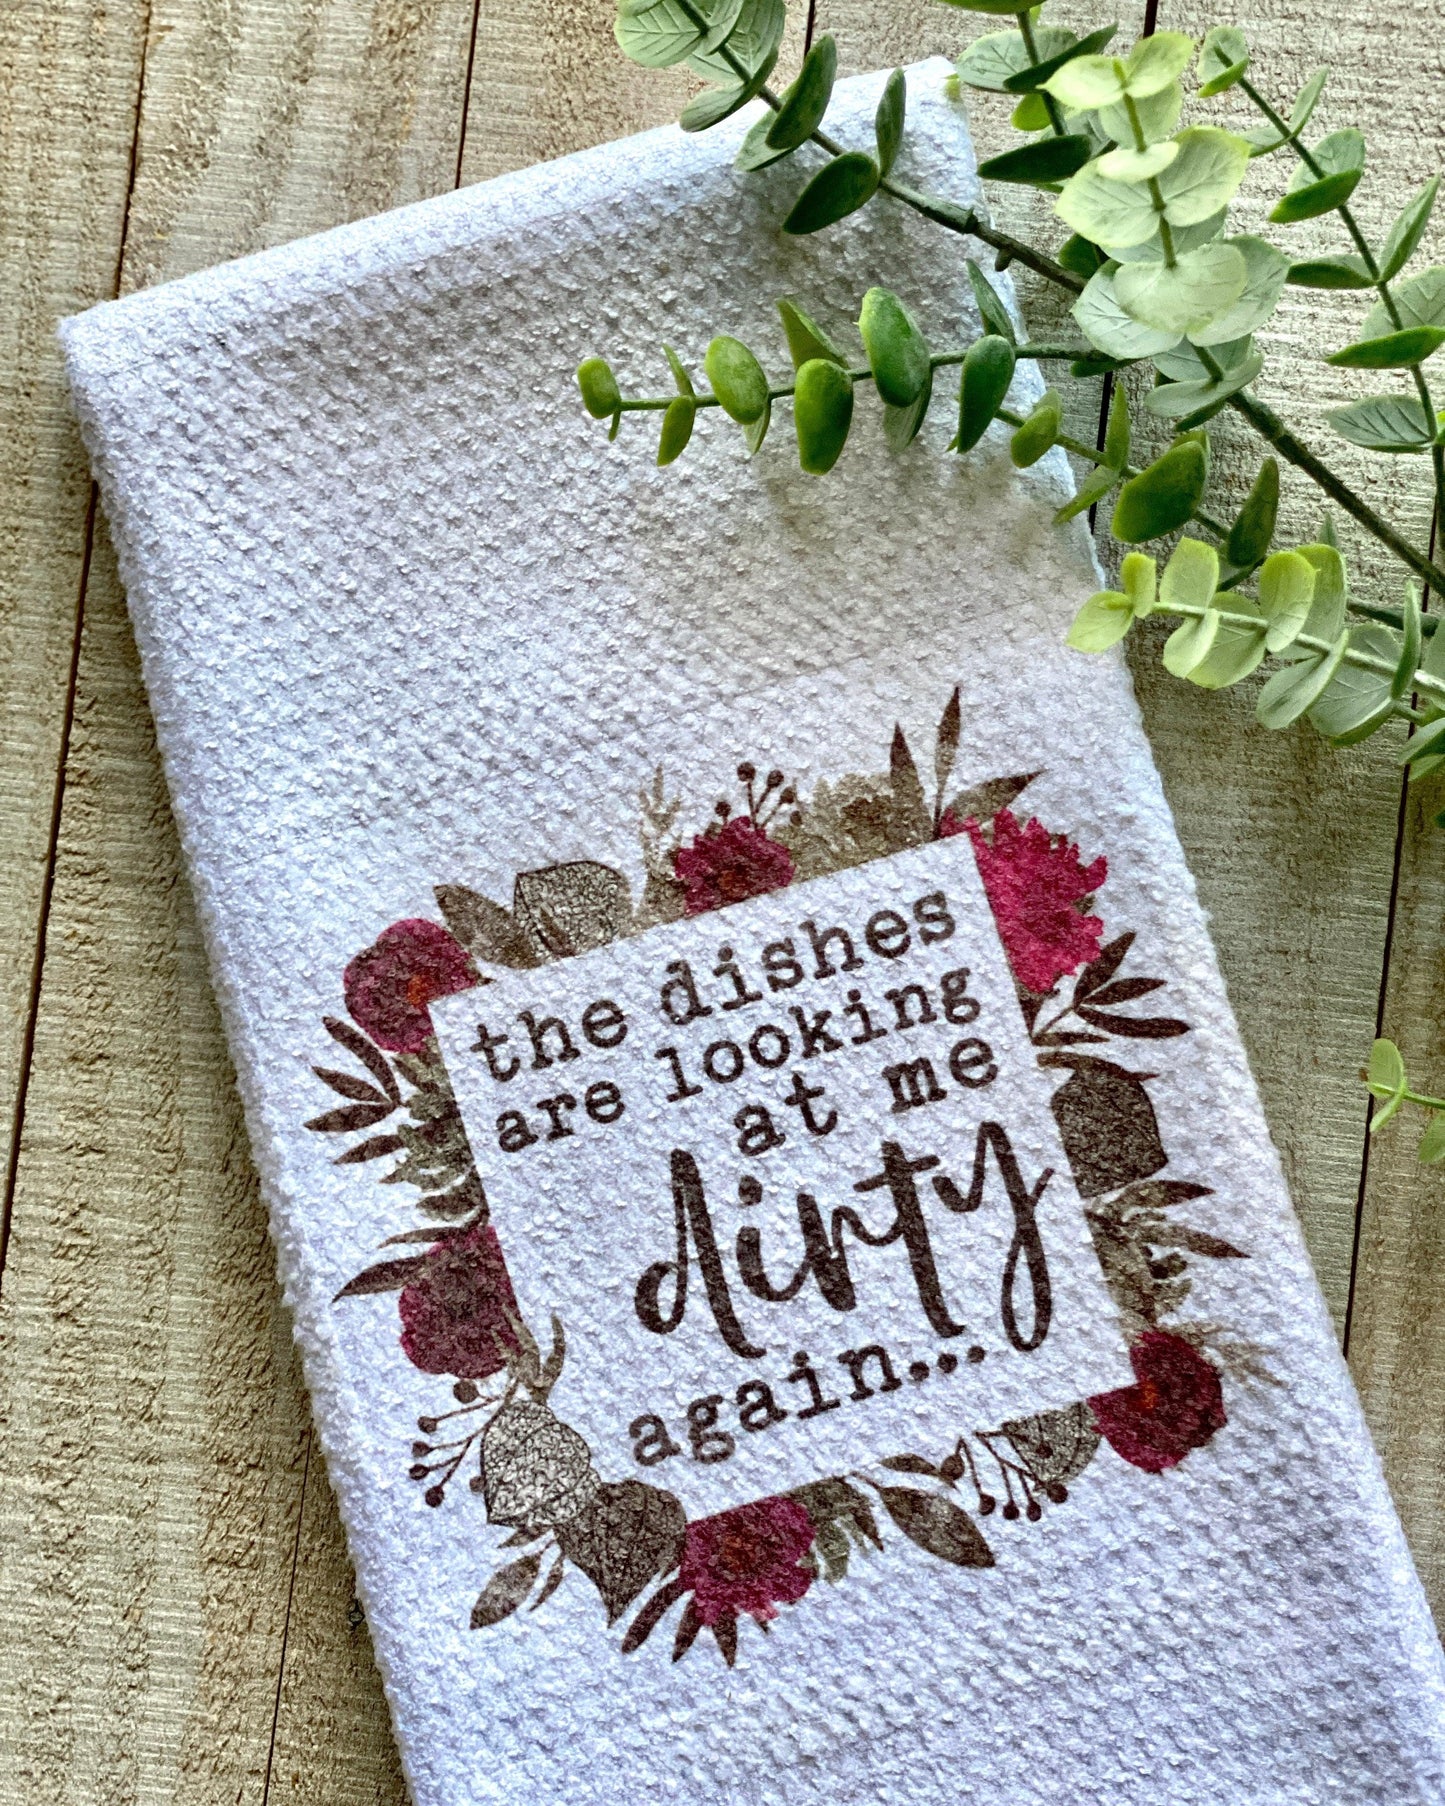 The Dishes Are Looking At Me Dirty Again - Kitchen Towel - Kitchen Towels -  Rustic Cuts